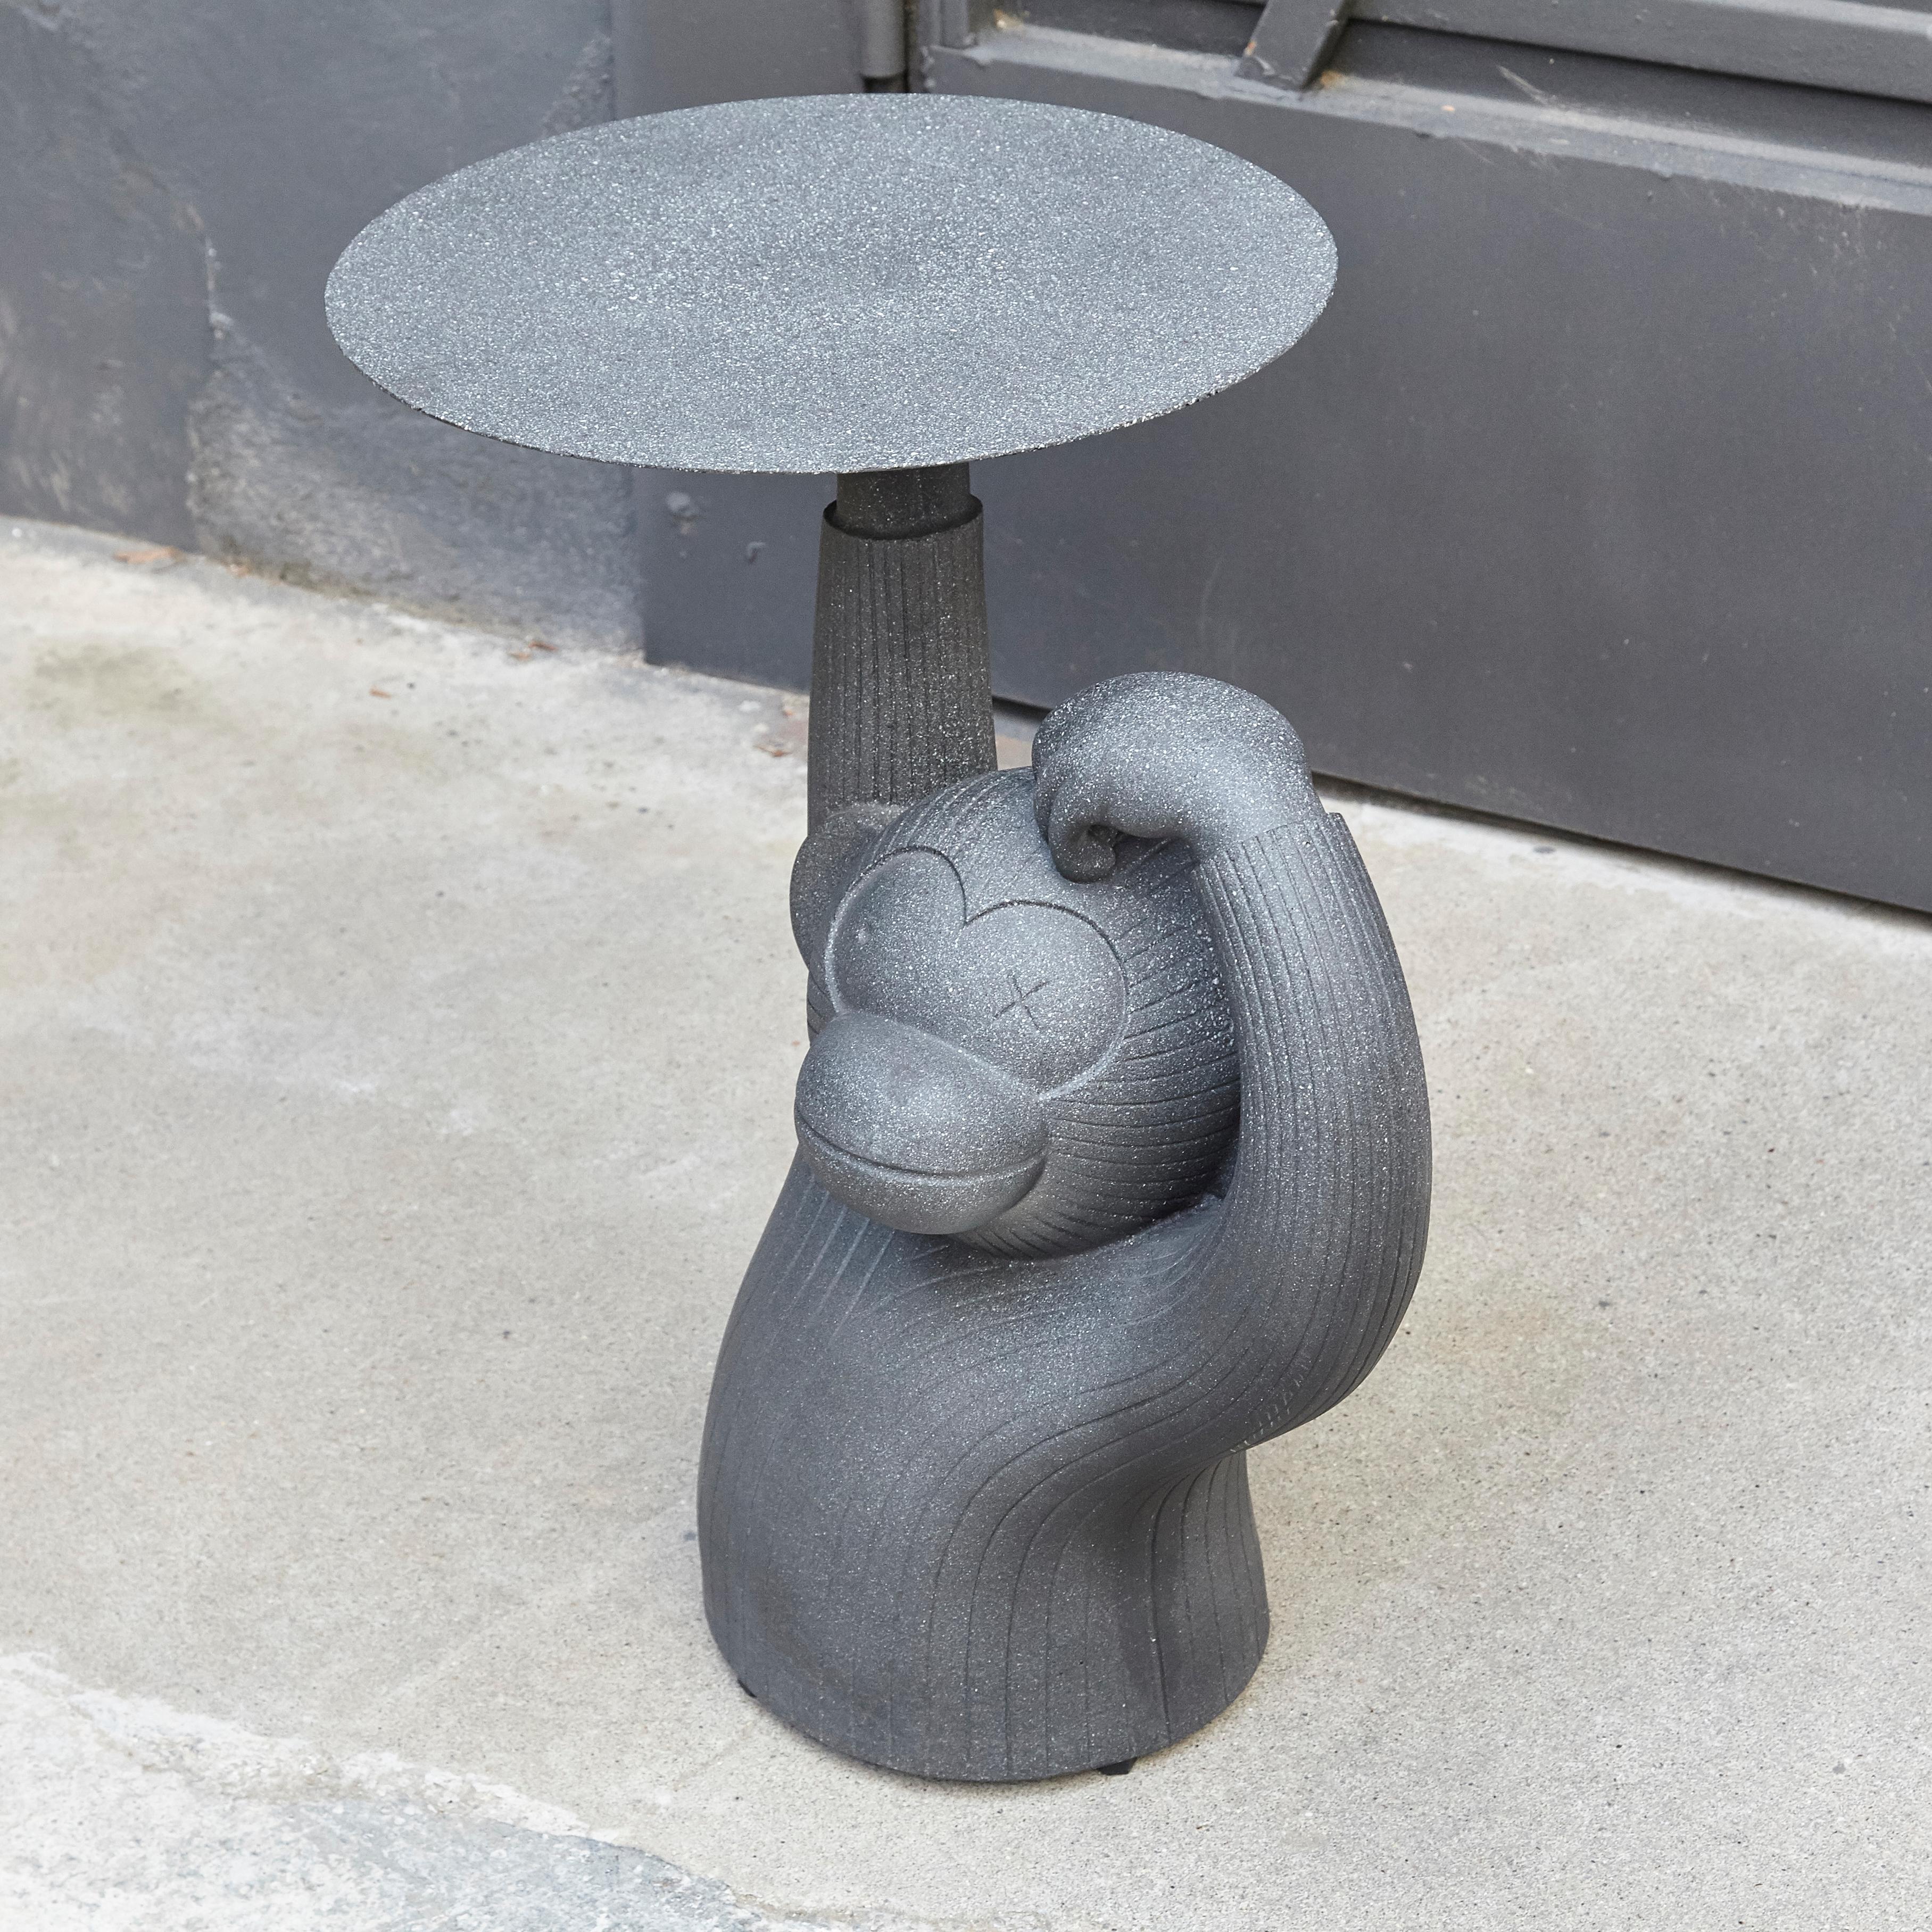 Monkey side table. Design by Jaime Hayon, 2016
Manufactured by BD Barcelona

Side table in one solid architectural concrete in grey/black. 
Includes regulatory glides.

In good condition with minor wear consisted of age and use.